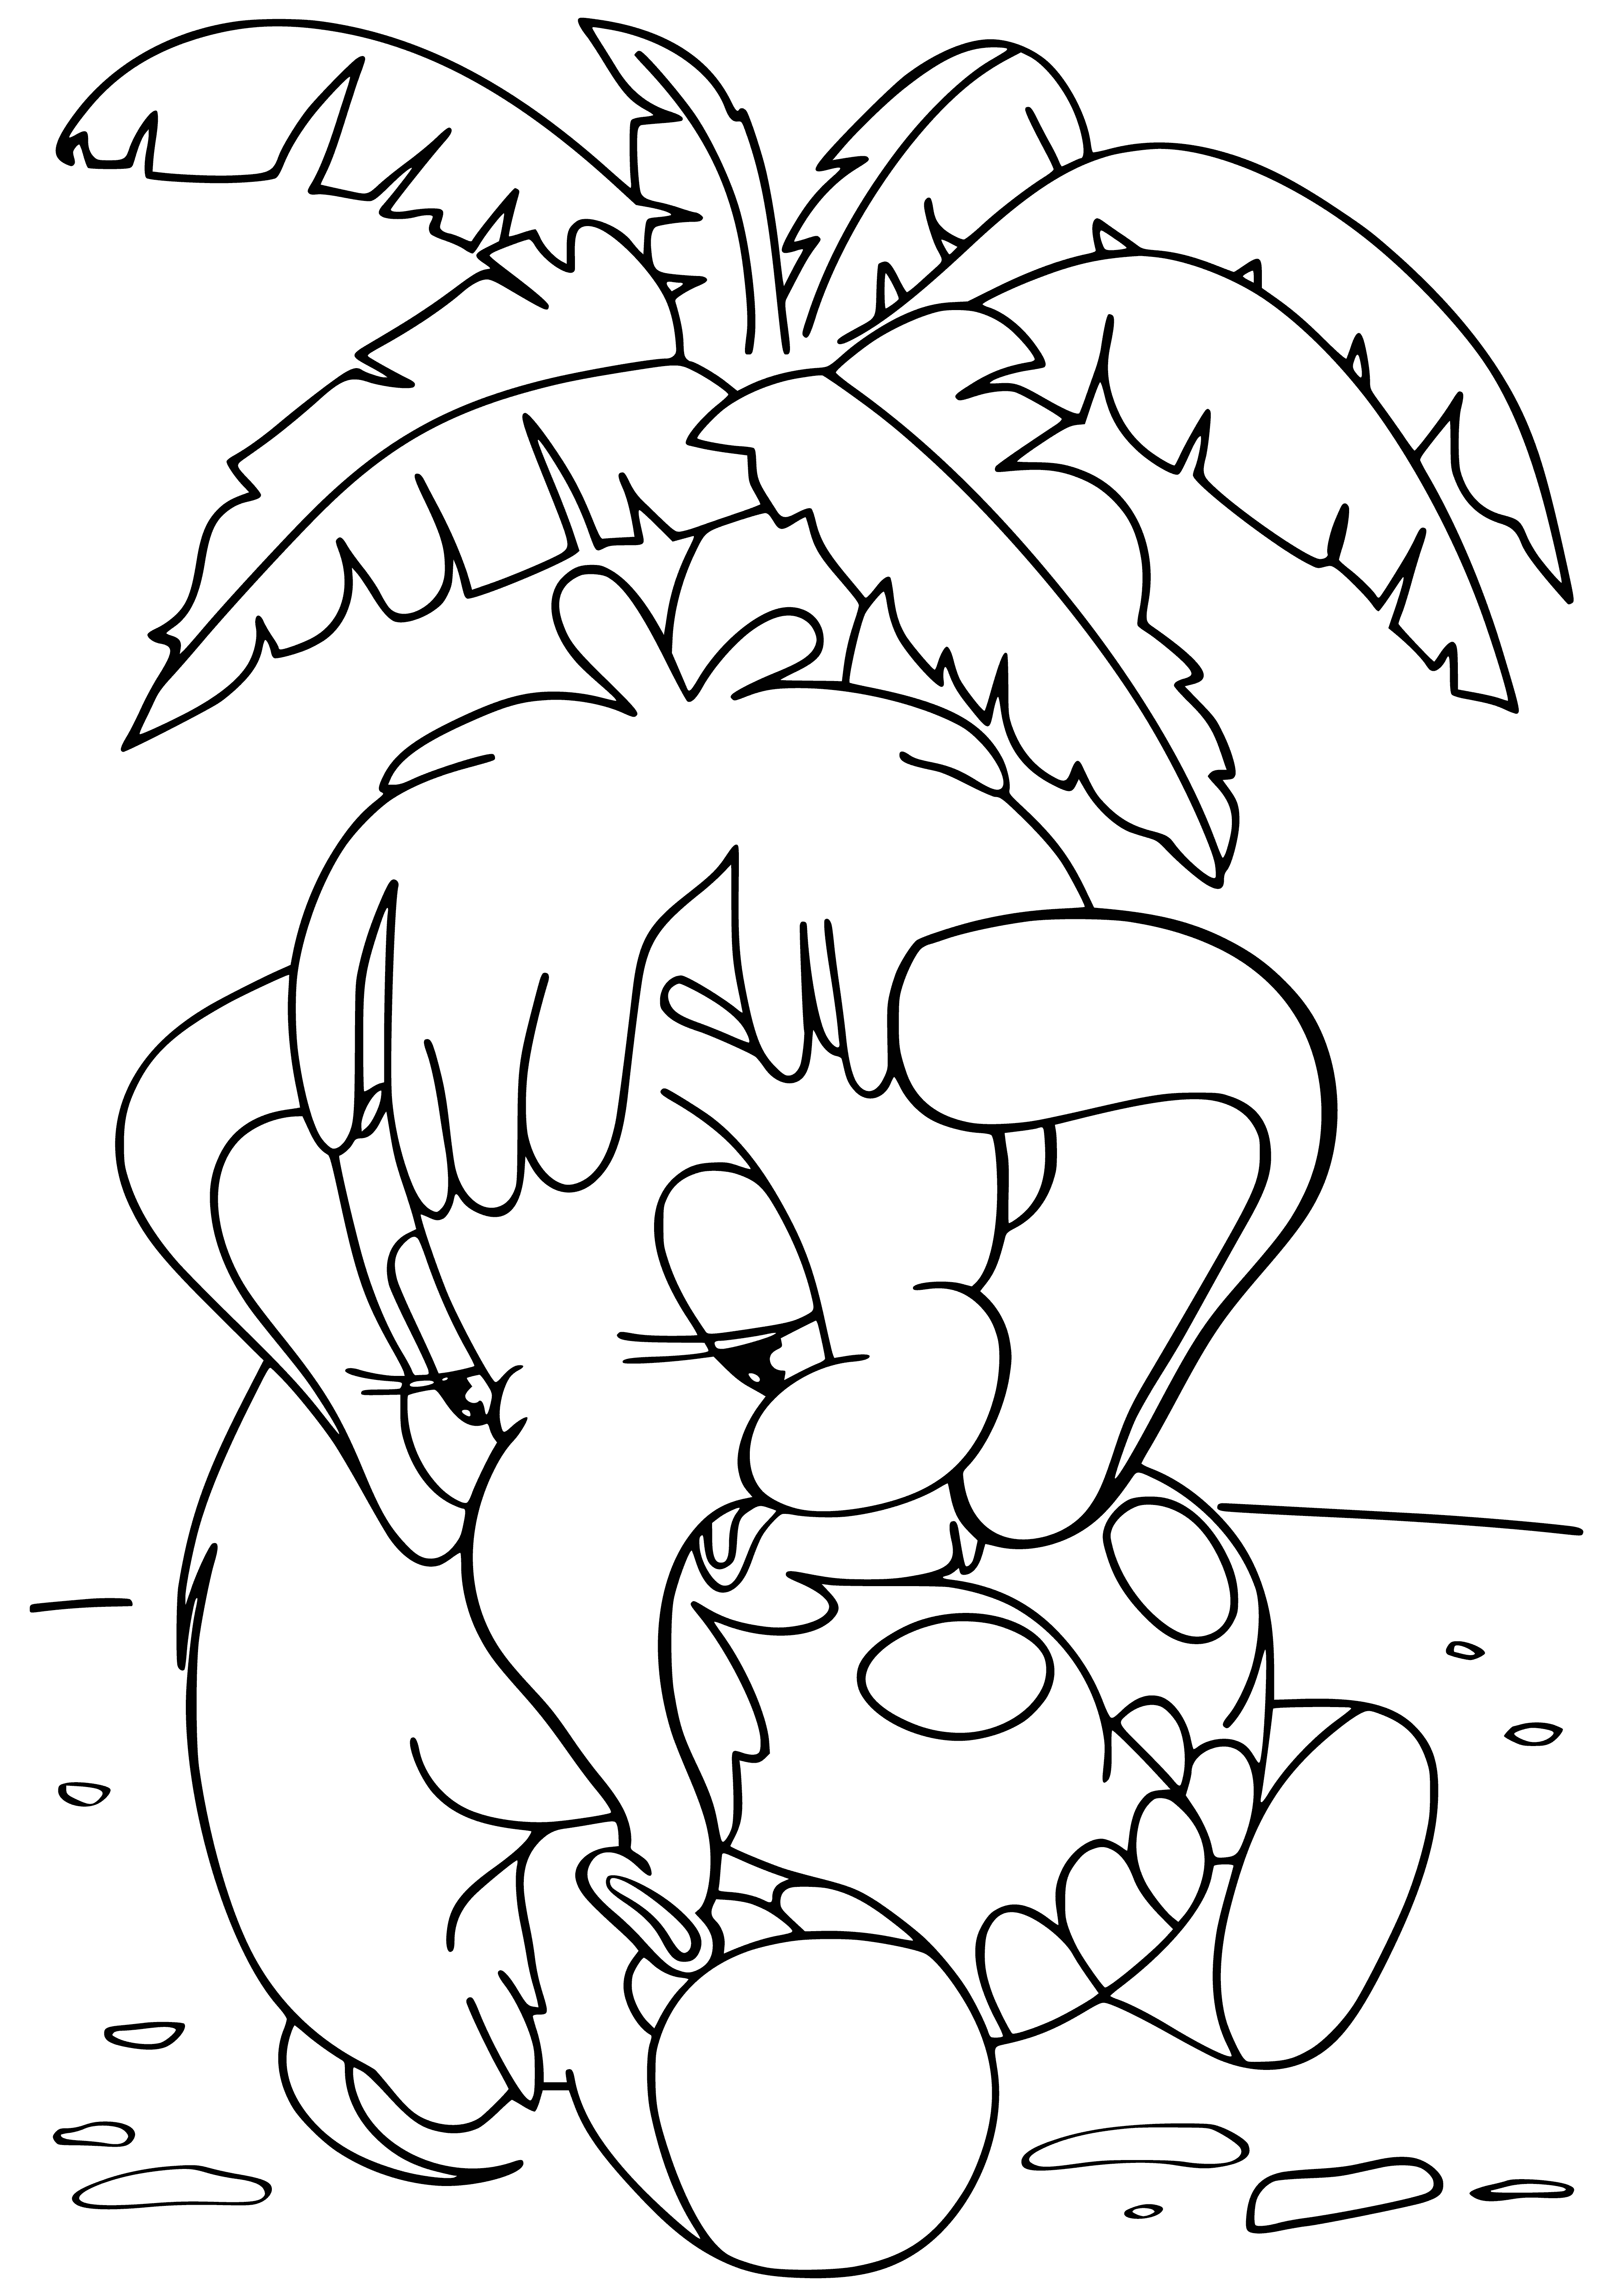 coloring page: A mammoth by a palm tree has trunk, long tail, two tusks, & four legs. She's big!